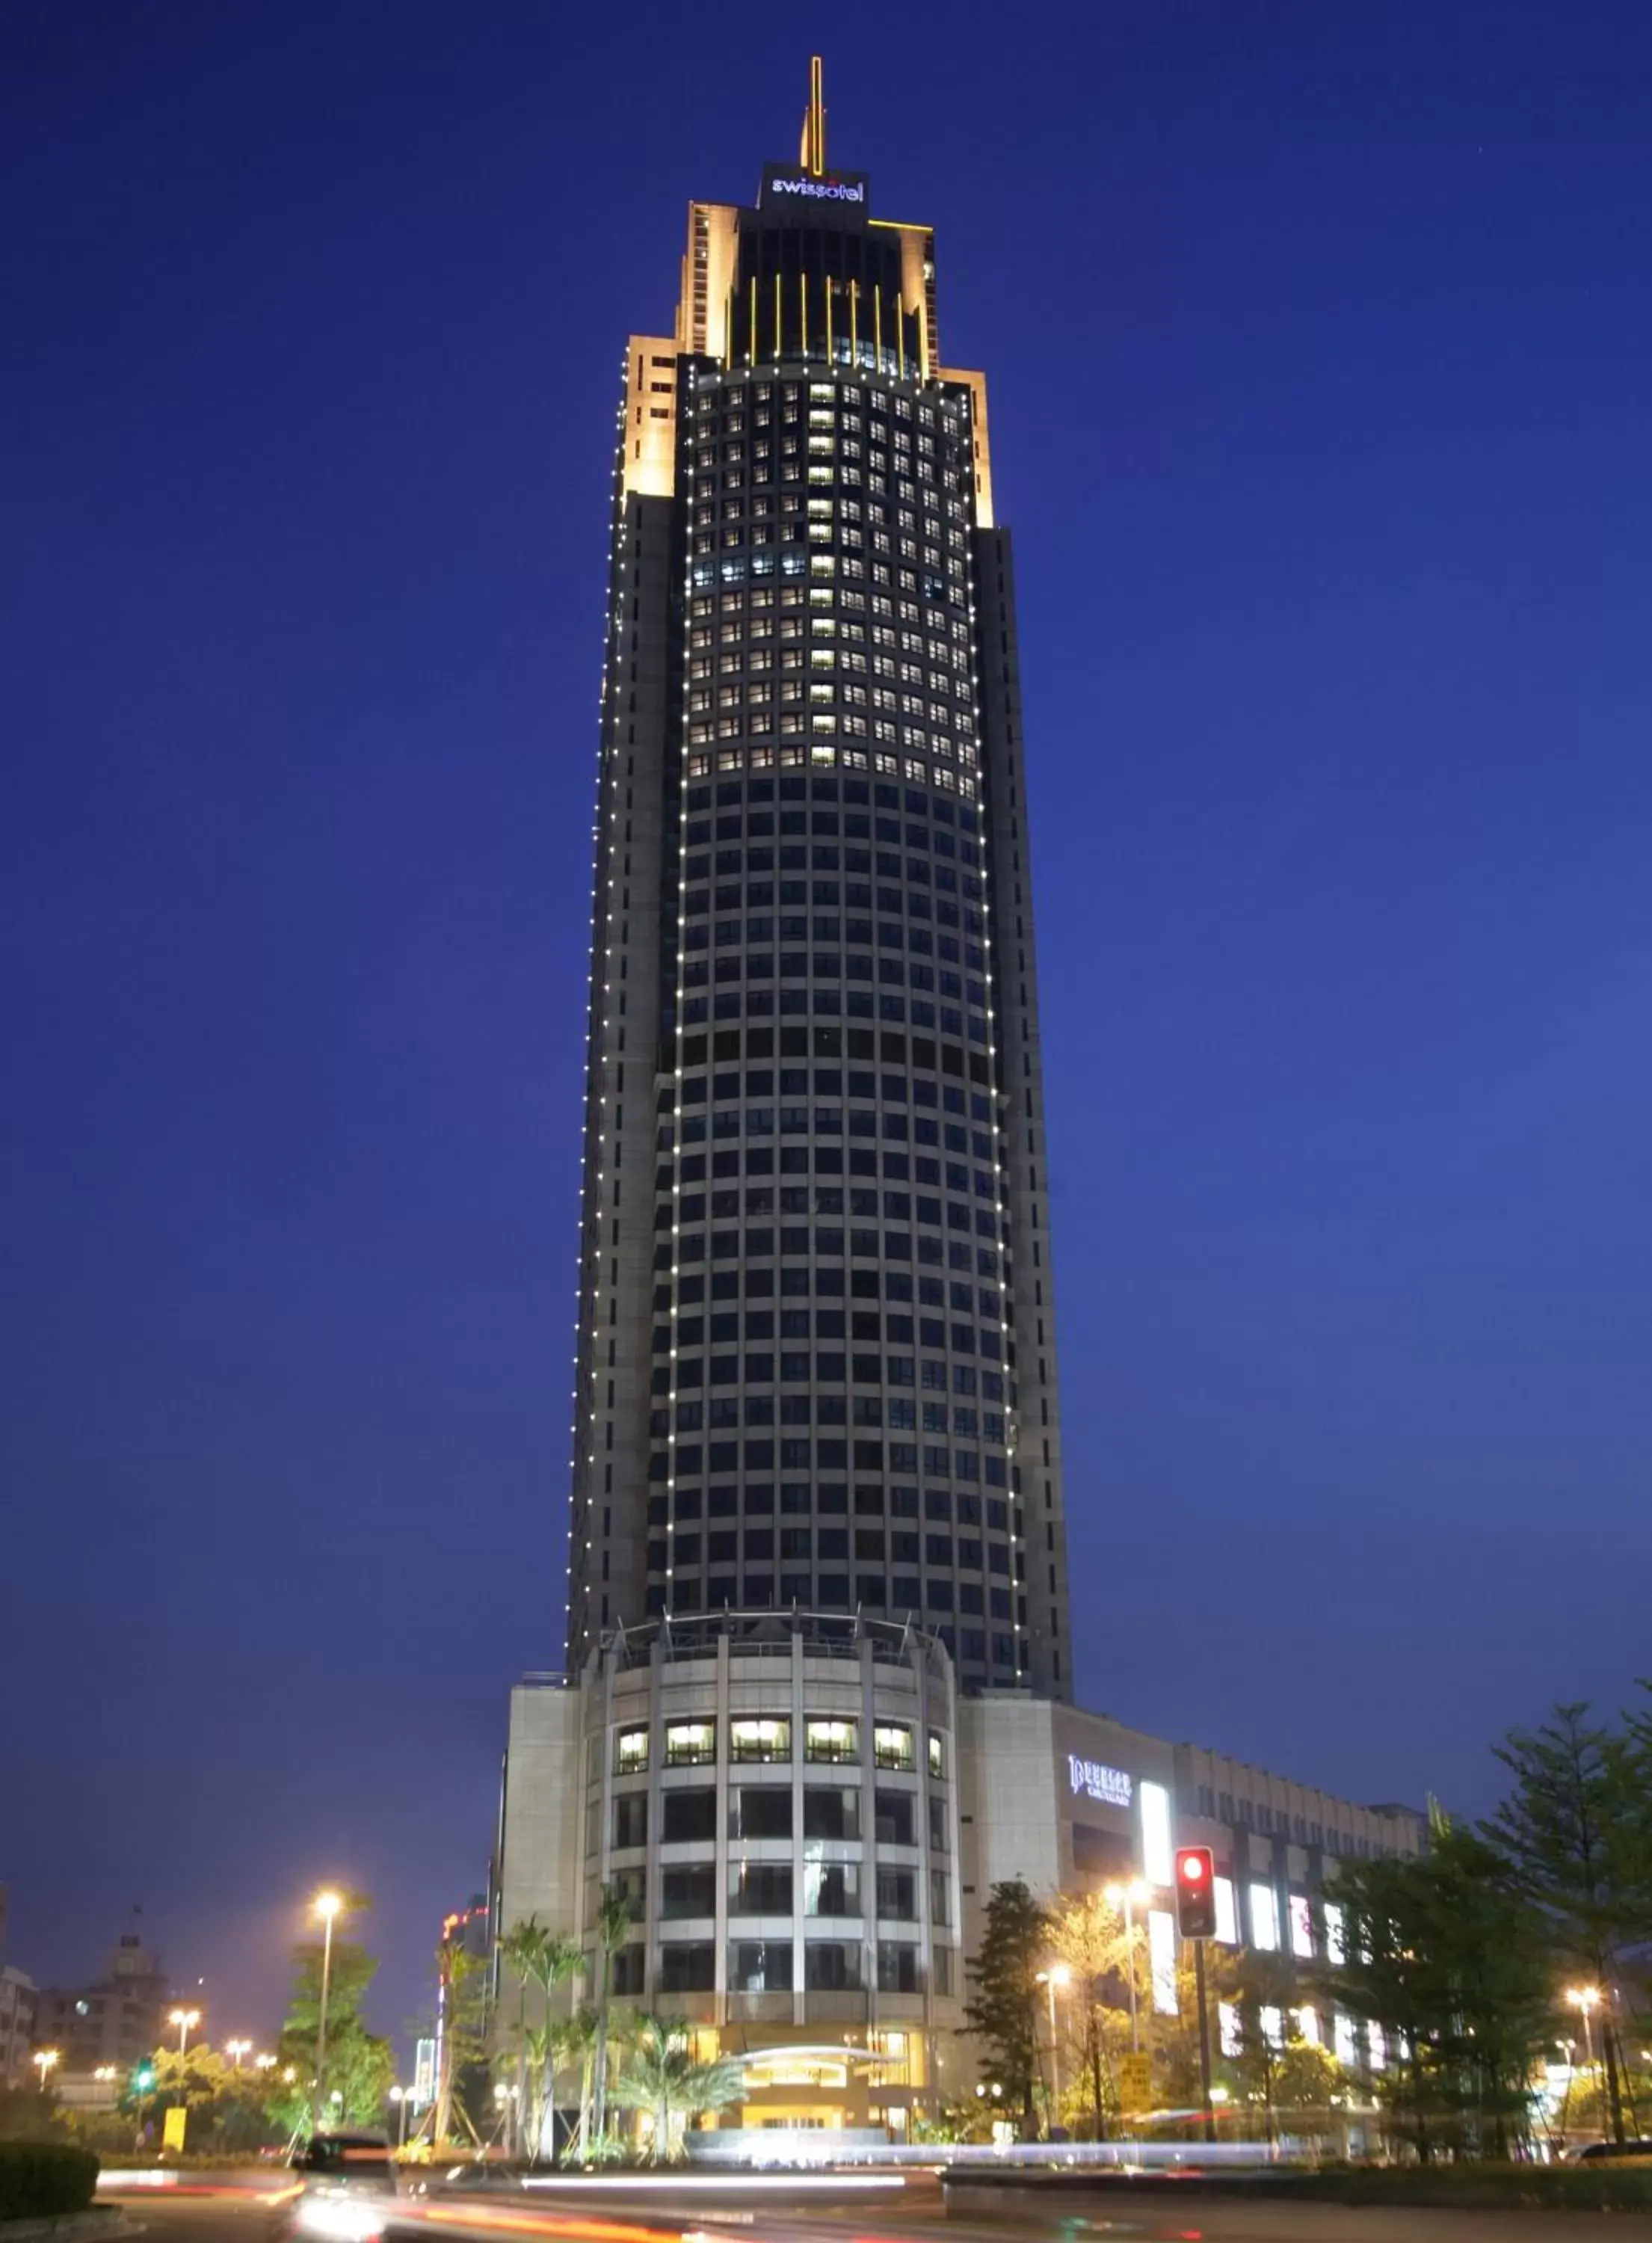 Property Building in Swissotel Foshan, Guangdong - Free shuttle bus during canton fair complex during canton fair period